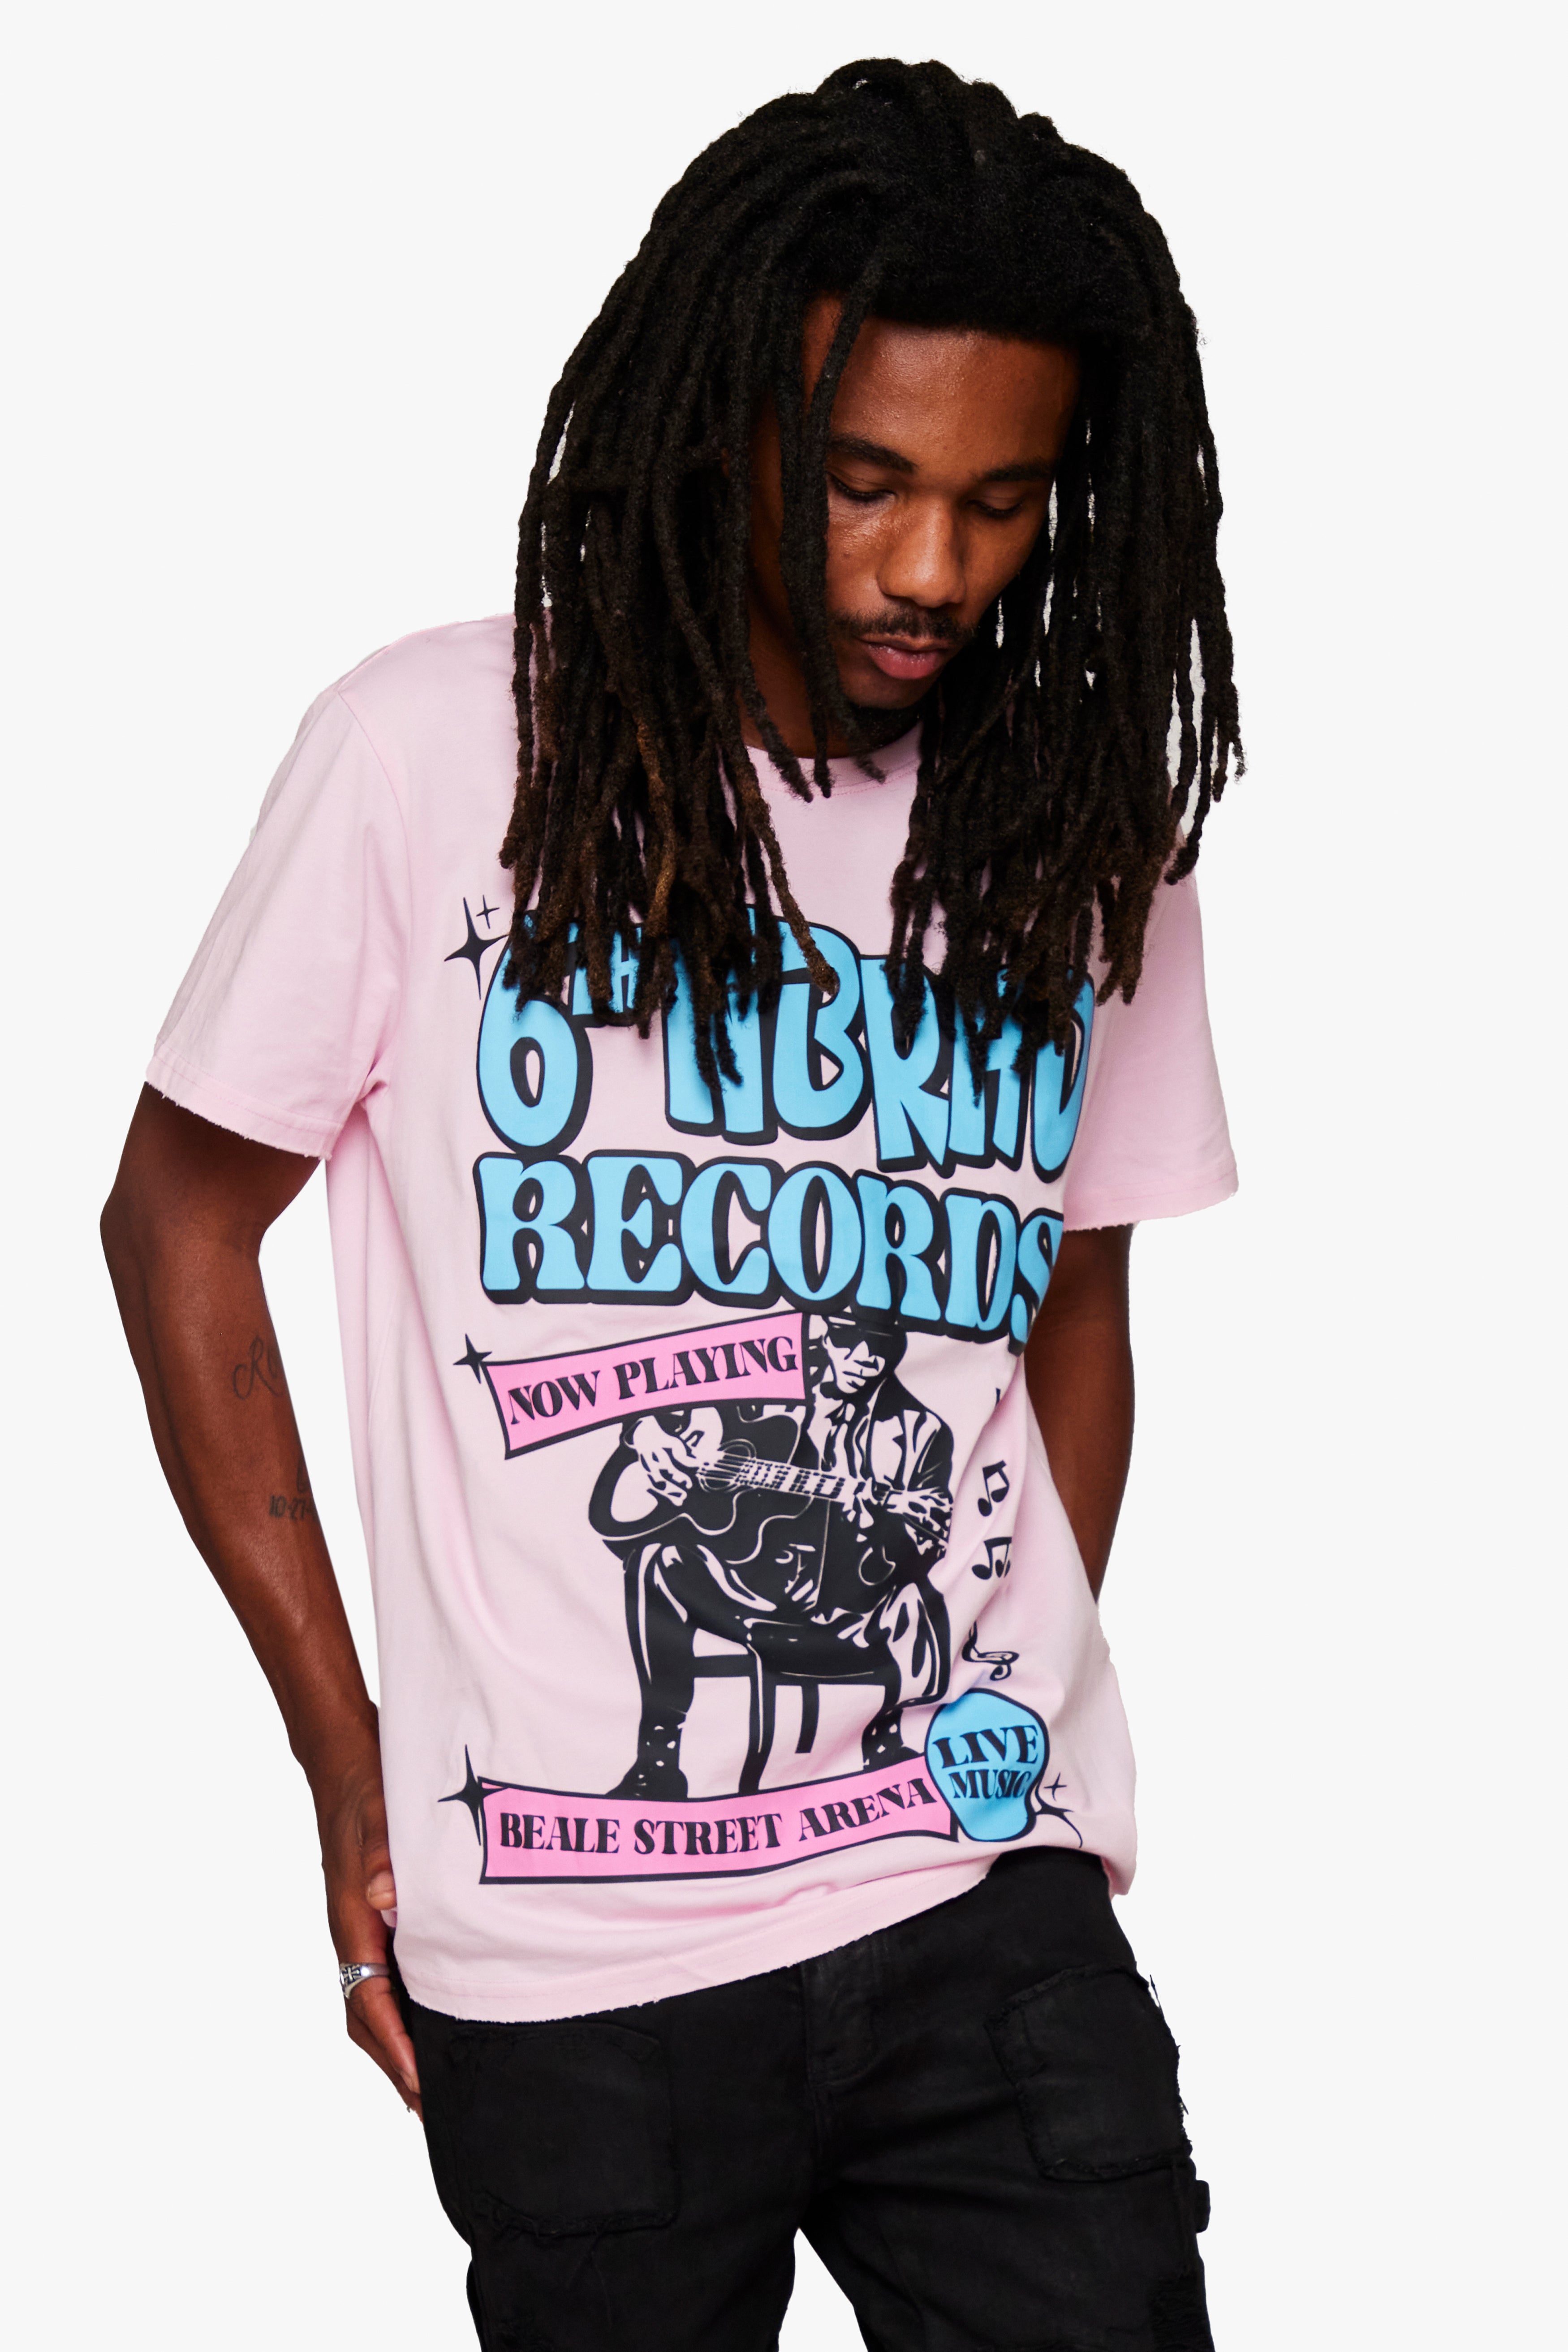 6thNBRHD TEE "NOW PLAYING" PINK